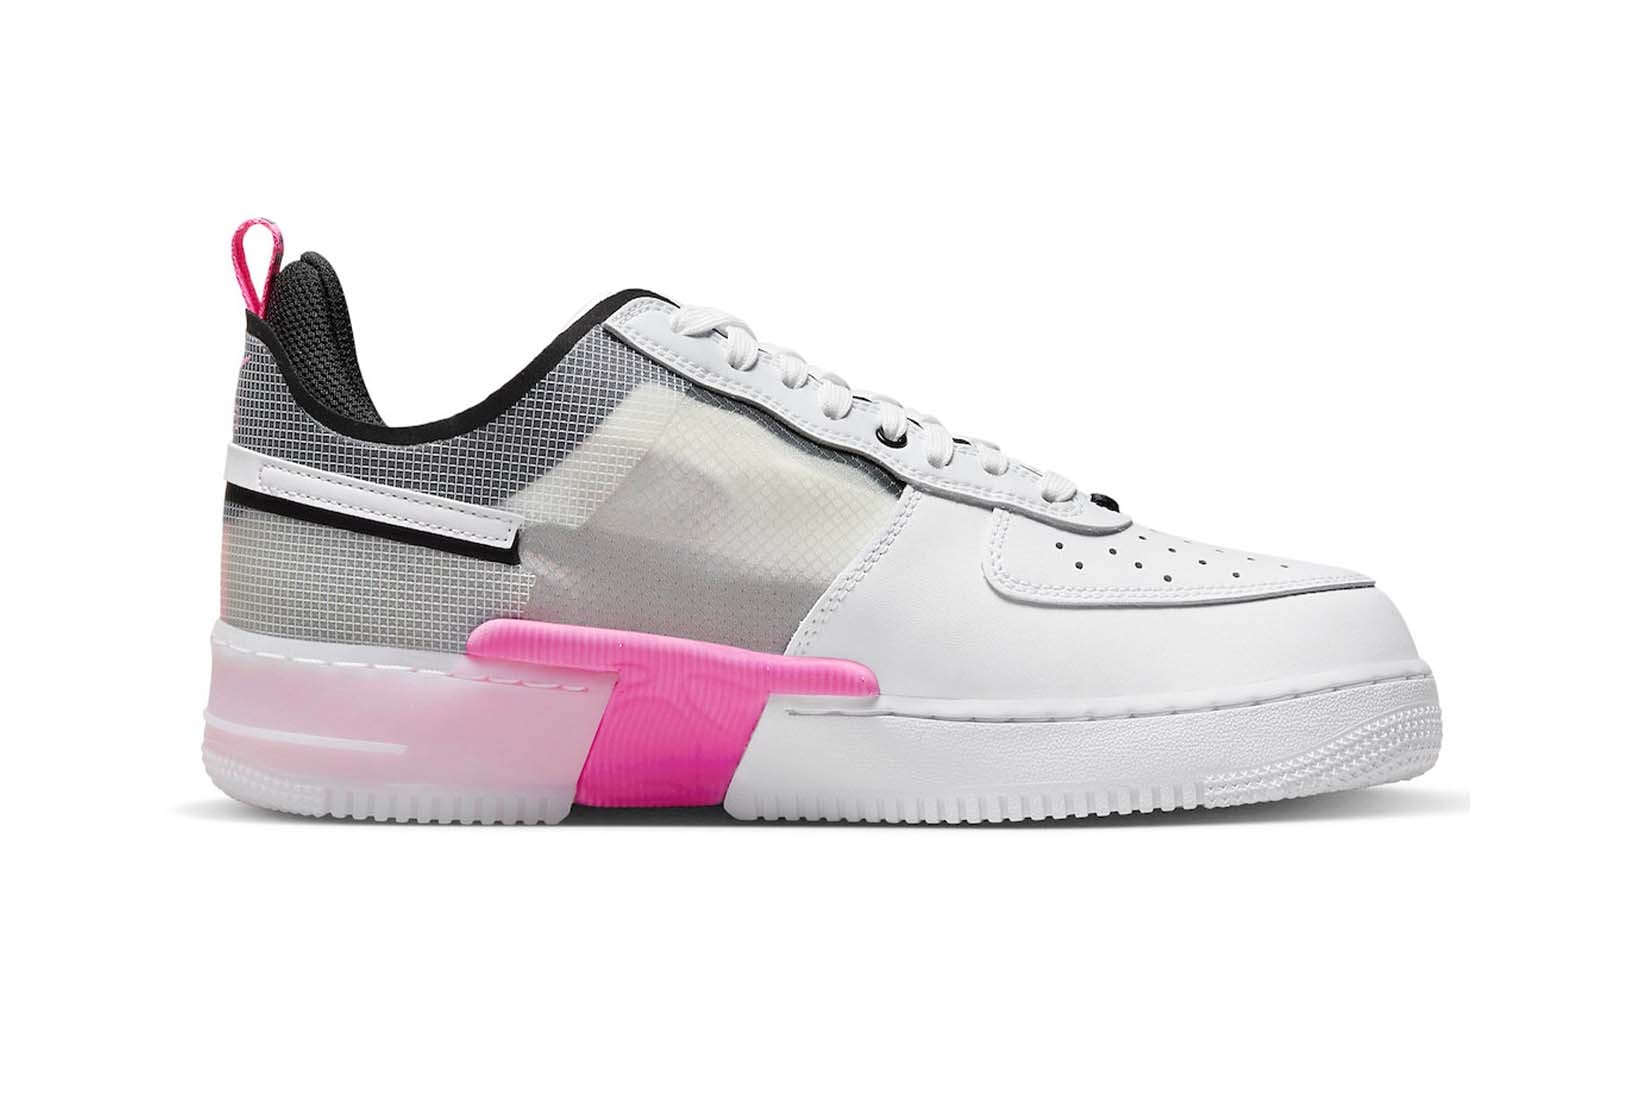 Nike Air Force 1 React Black White Pink Spell dv0808-100 Release Date